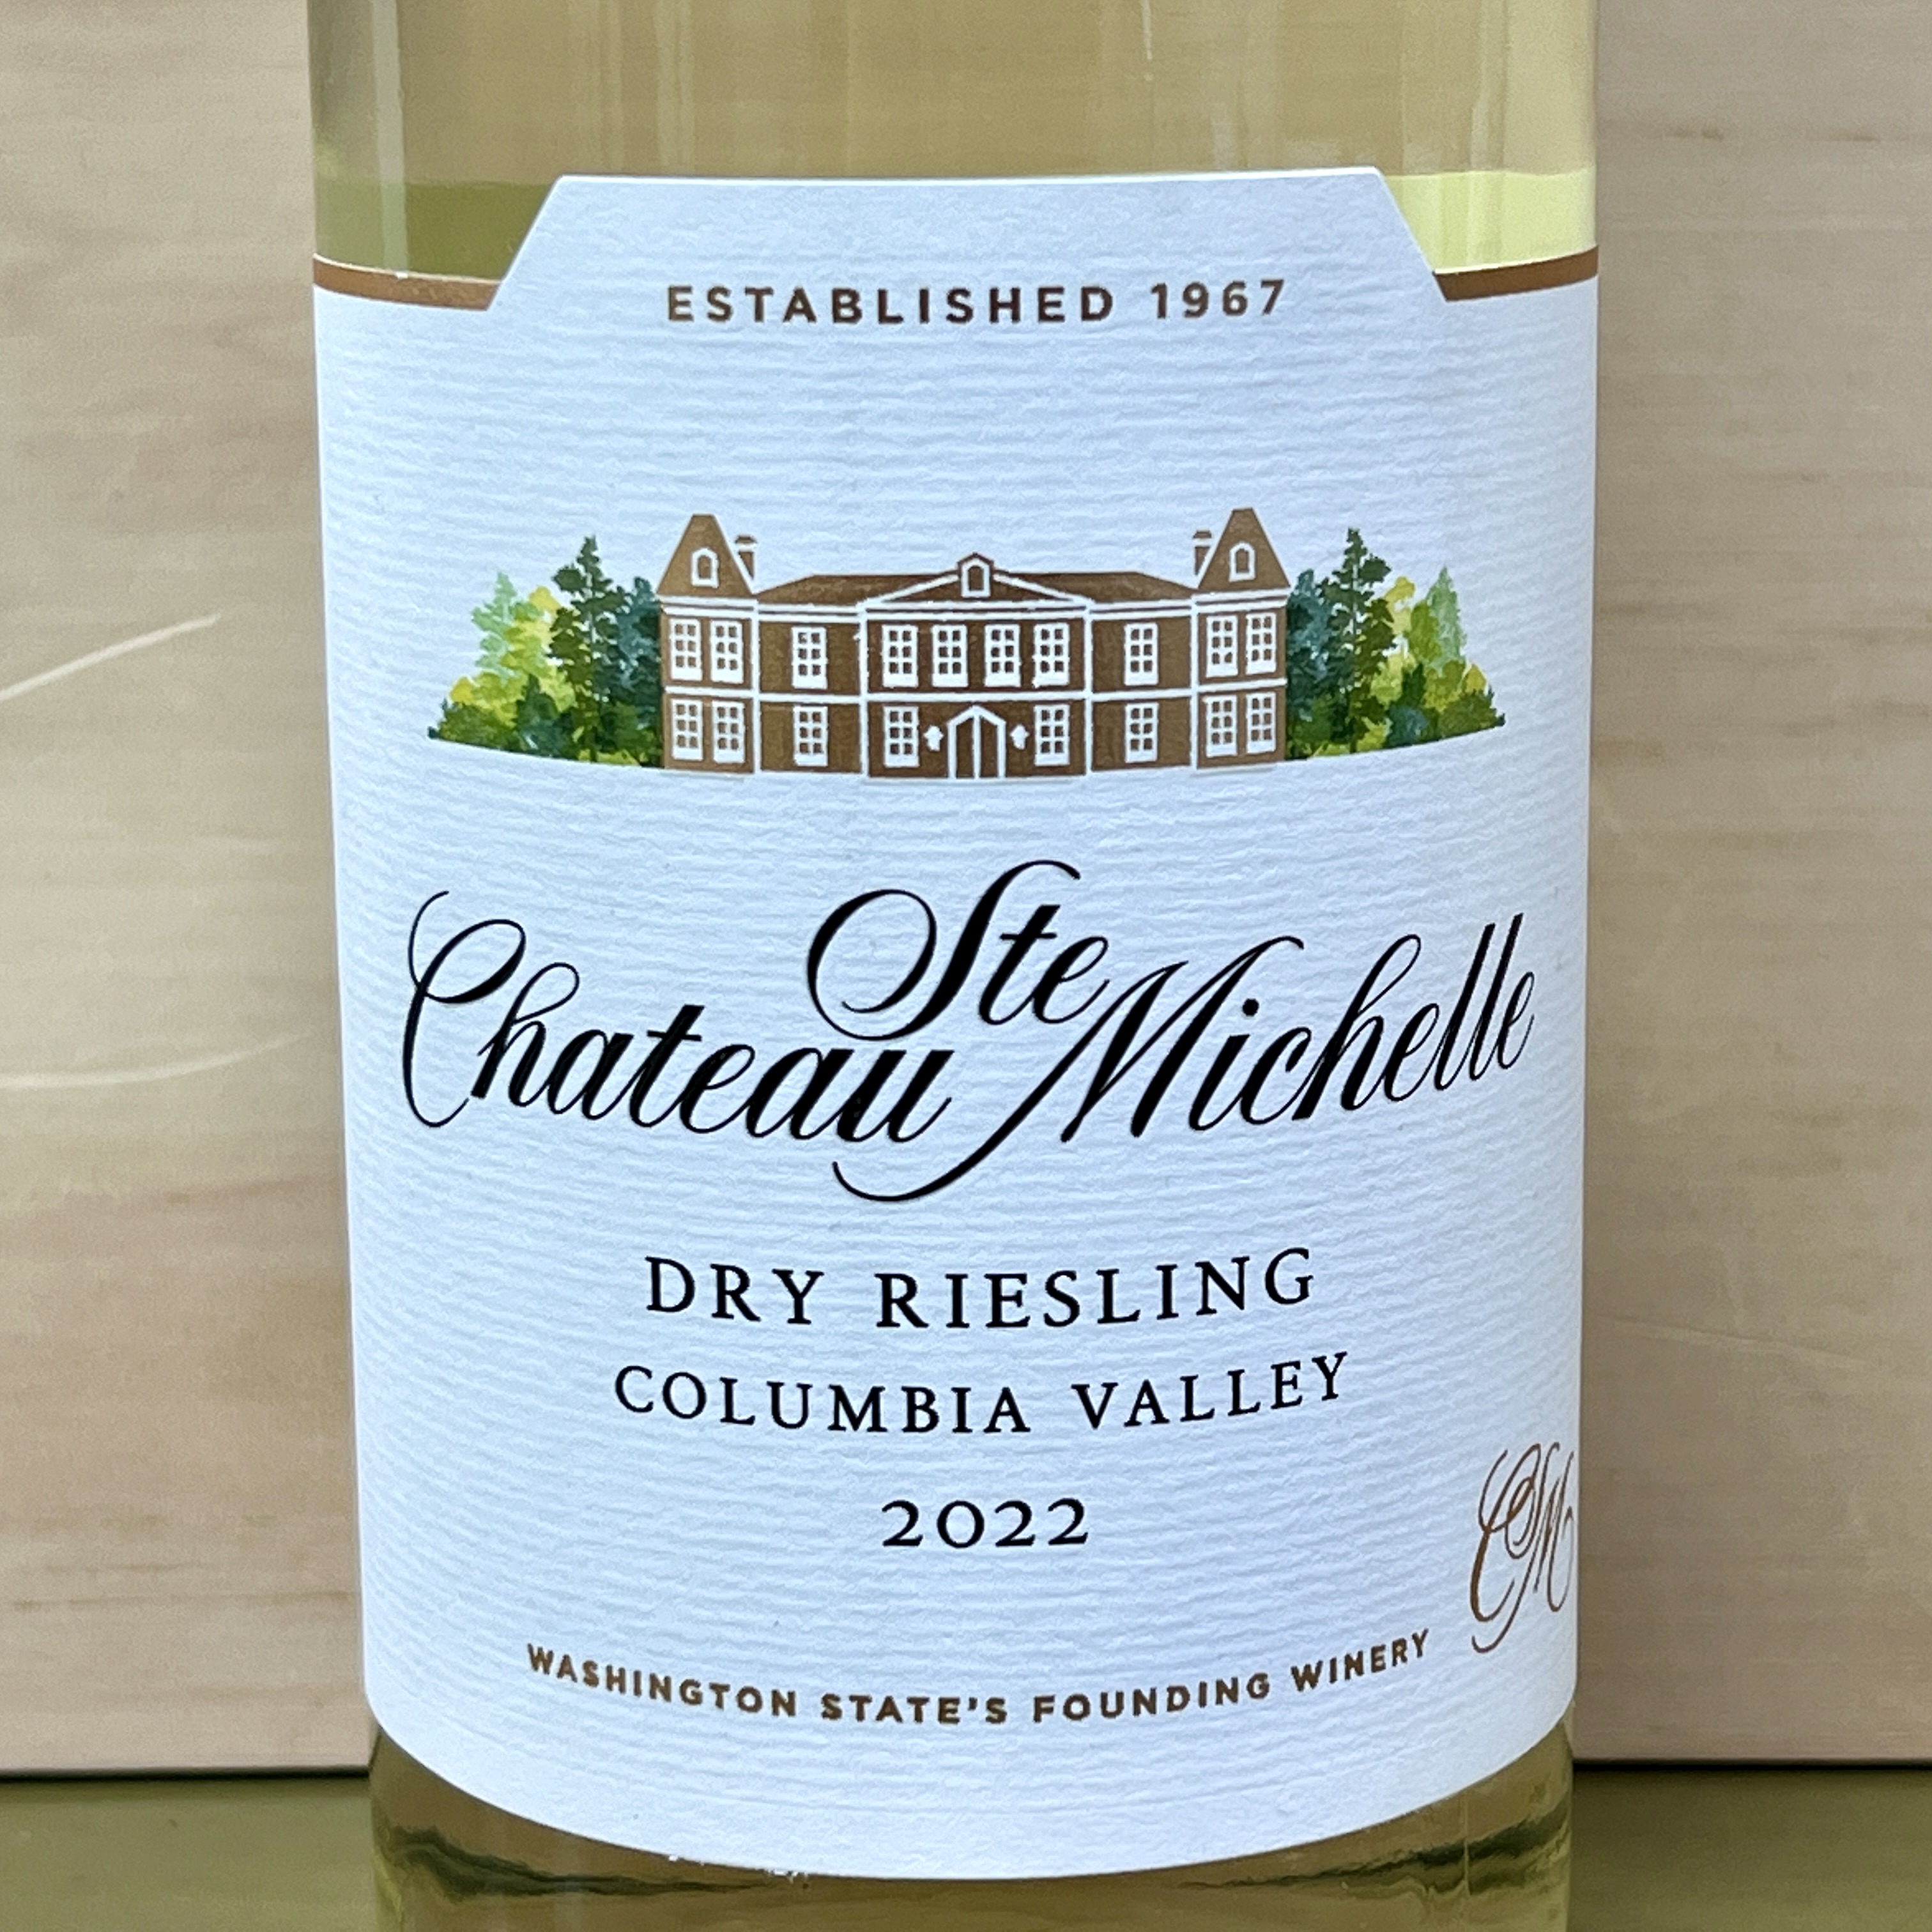 Chateau Ste Michelle Dry Riesling Columbia Valley 2022